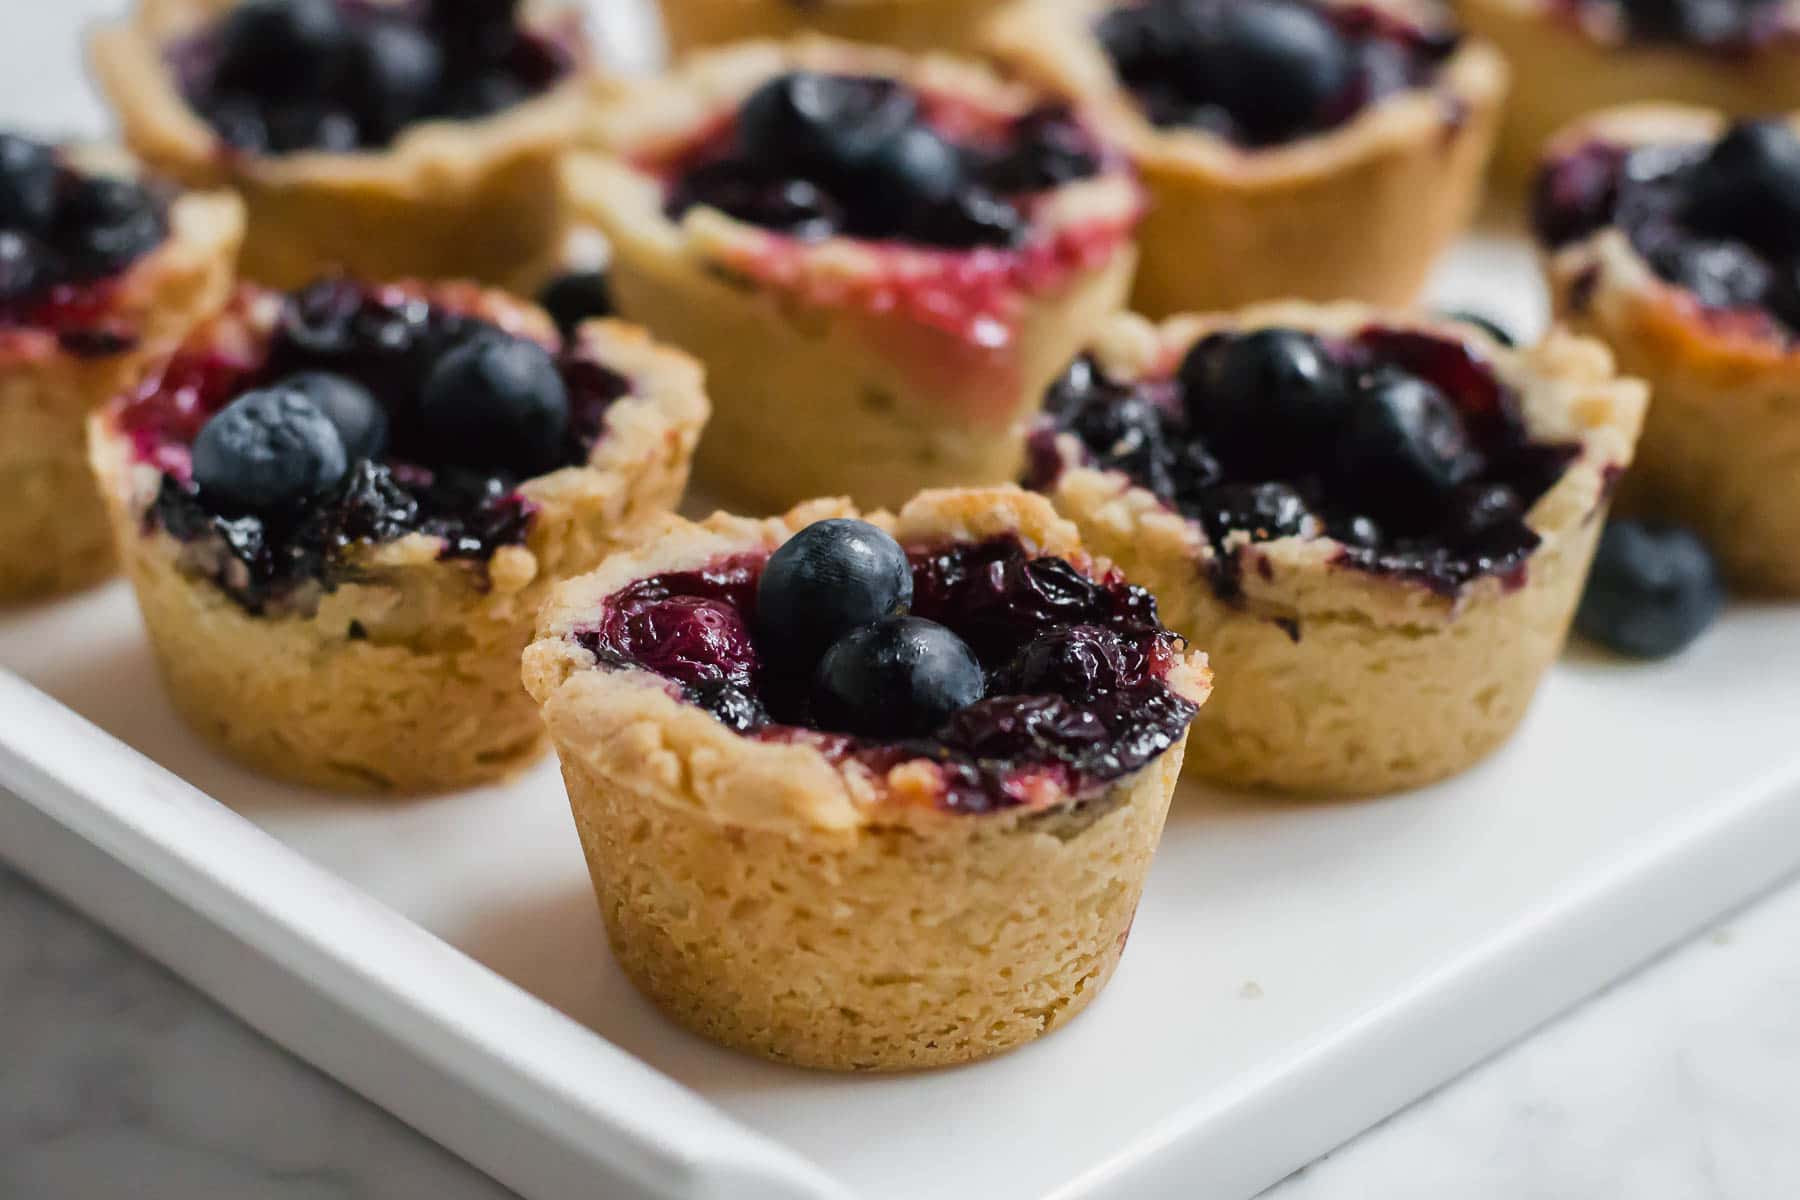 Rows of gluten-free mini blueberry tarts with a cookie crust on a serving plate